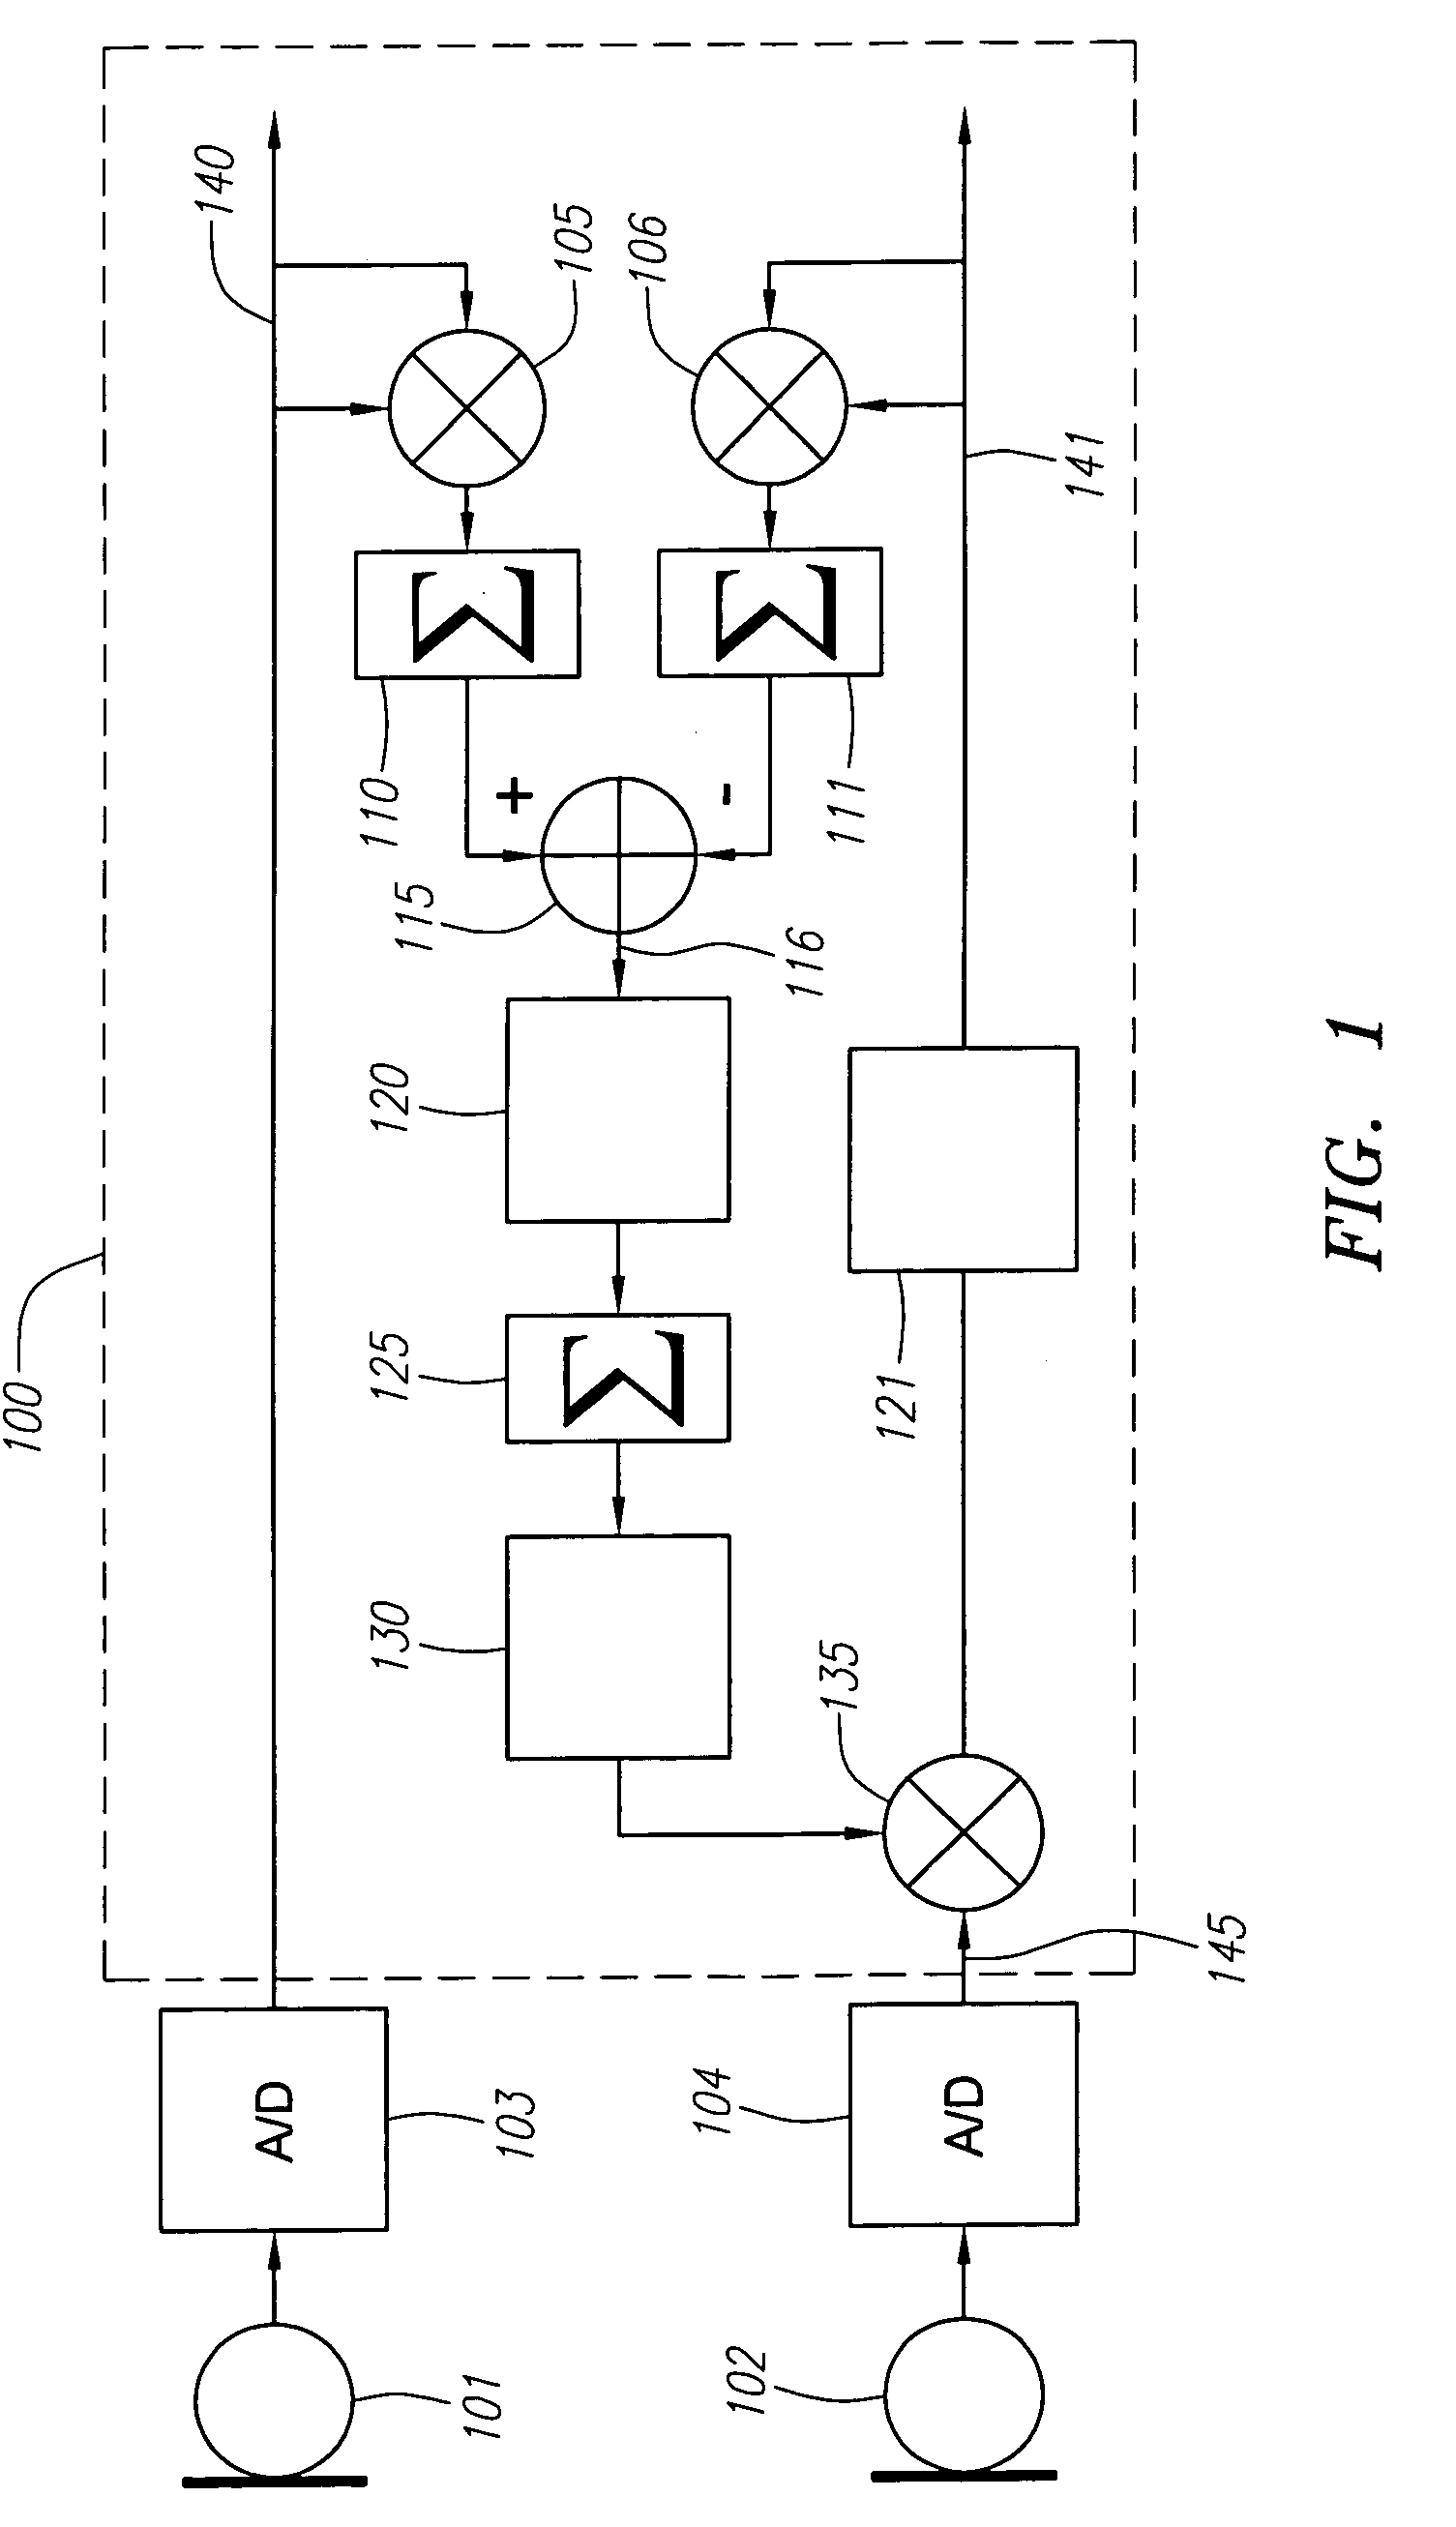 Hearing aid with adaptive microphone matching